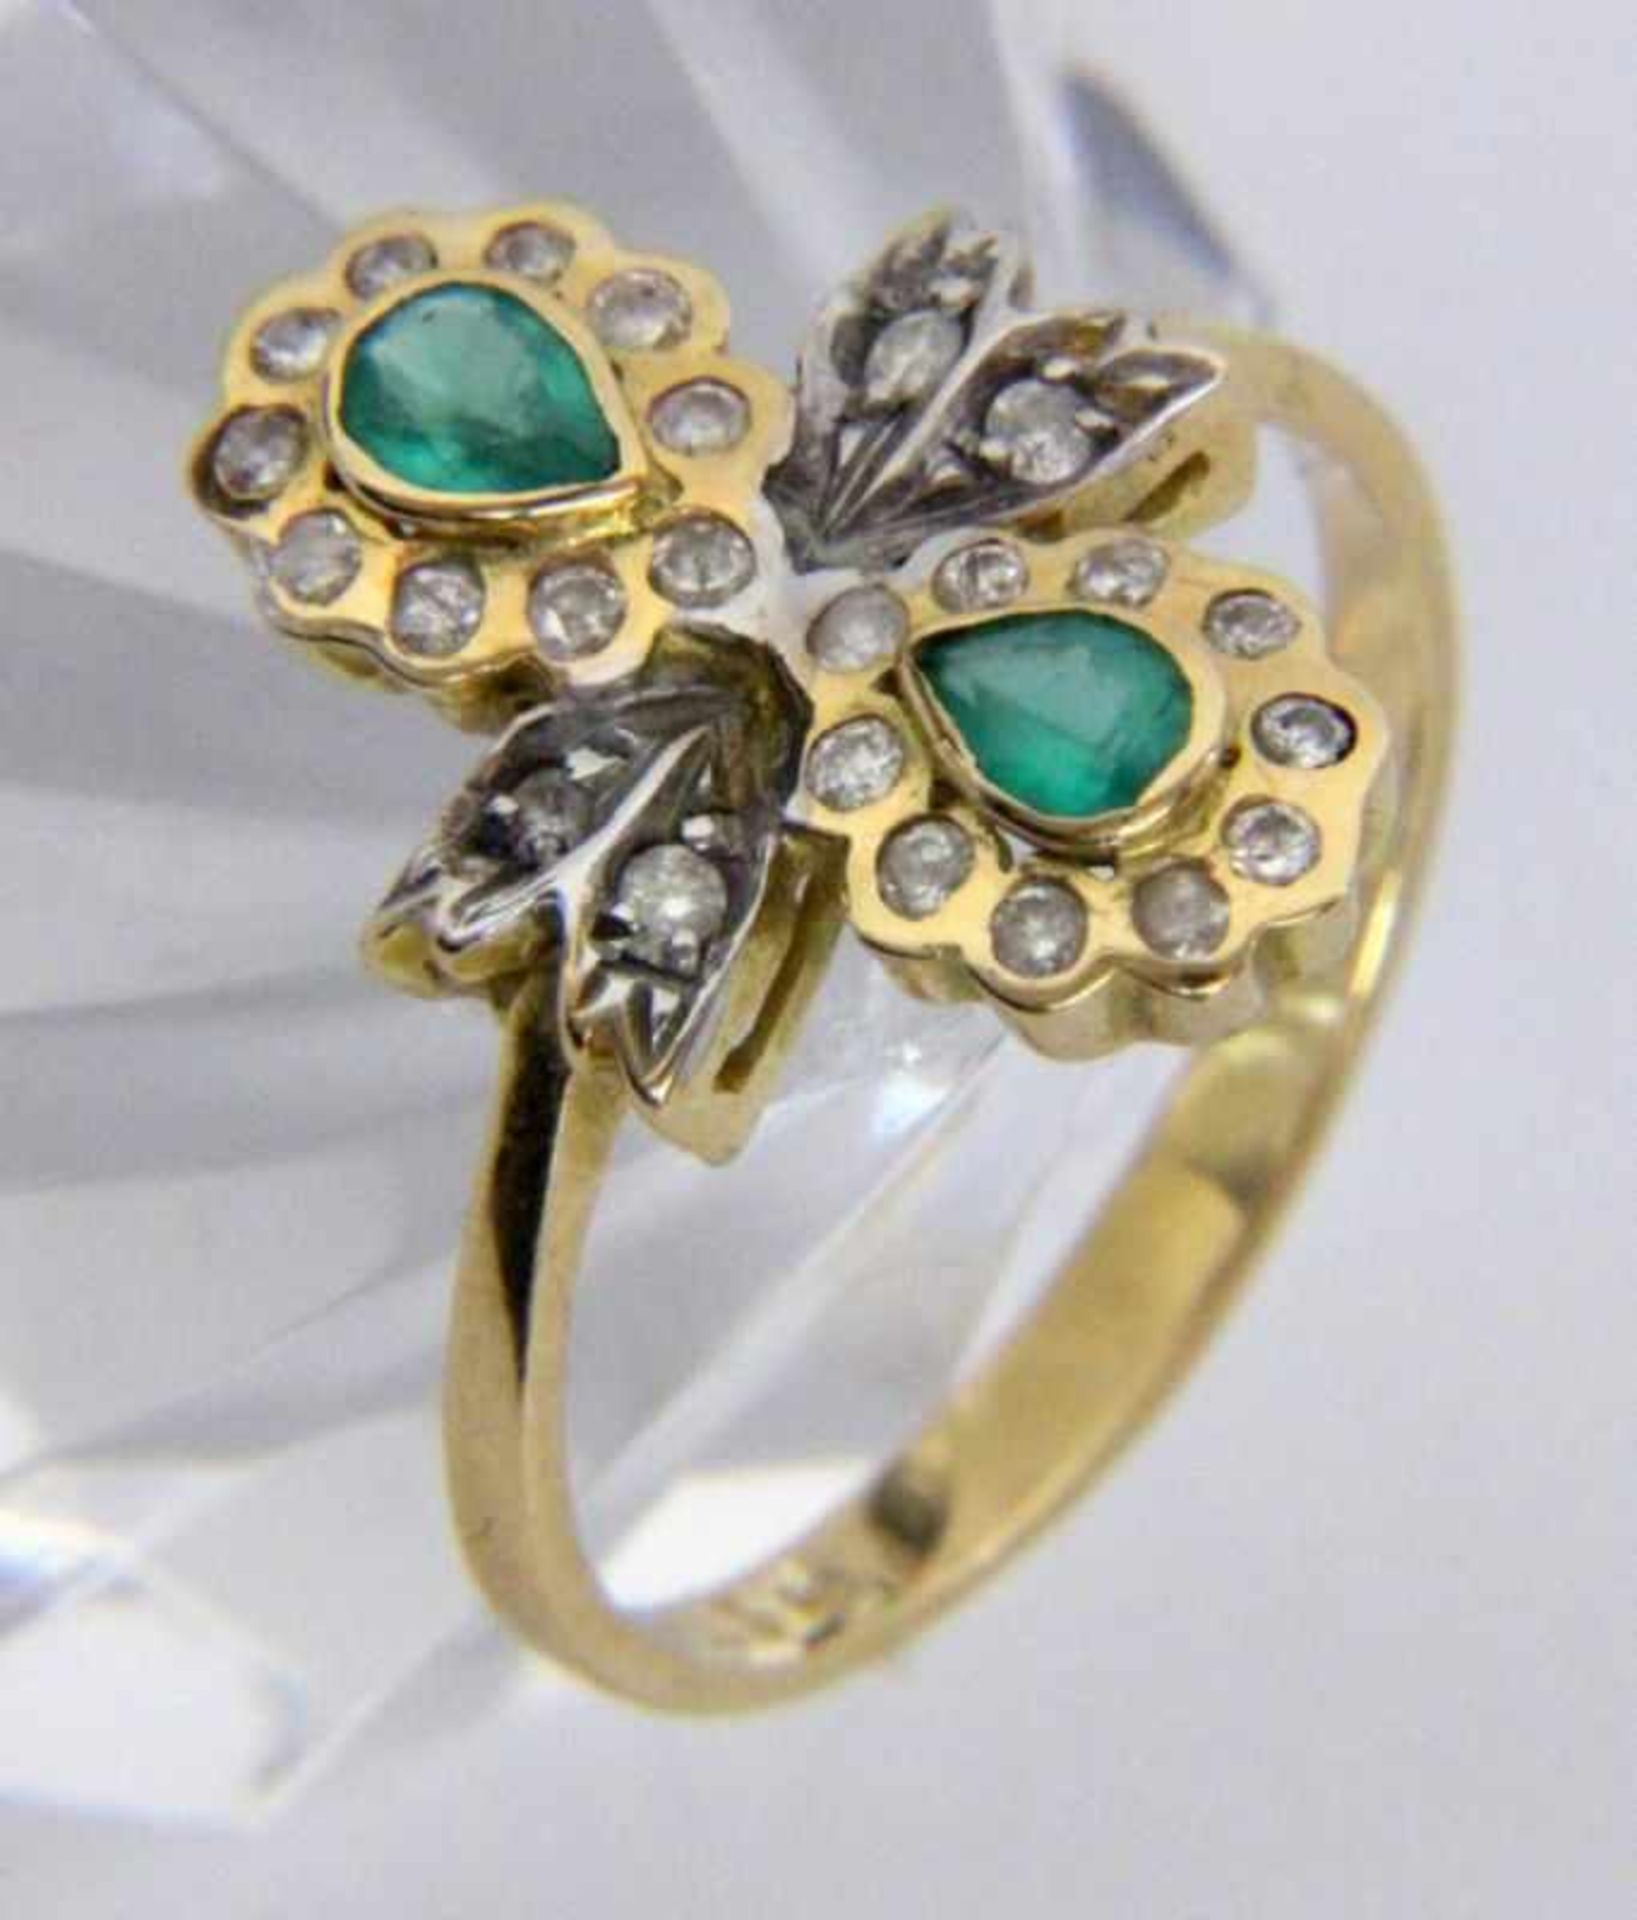 ''A LADIES RING 585/000 yellow gold two emeralds and diamonds. Ring size 55, gross weight